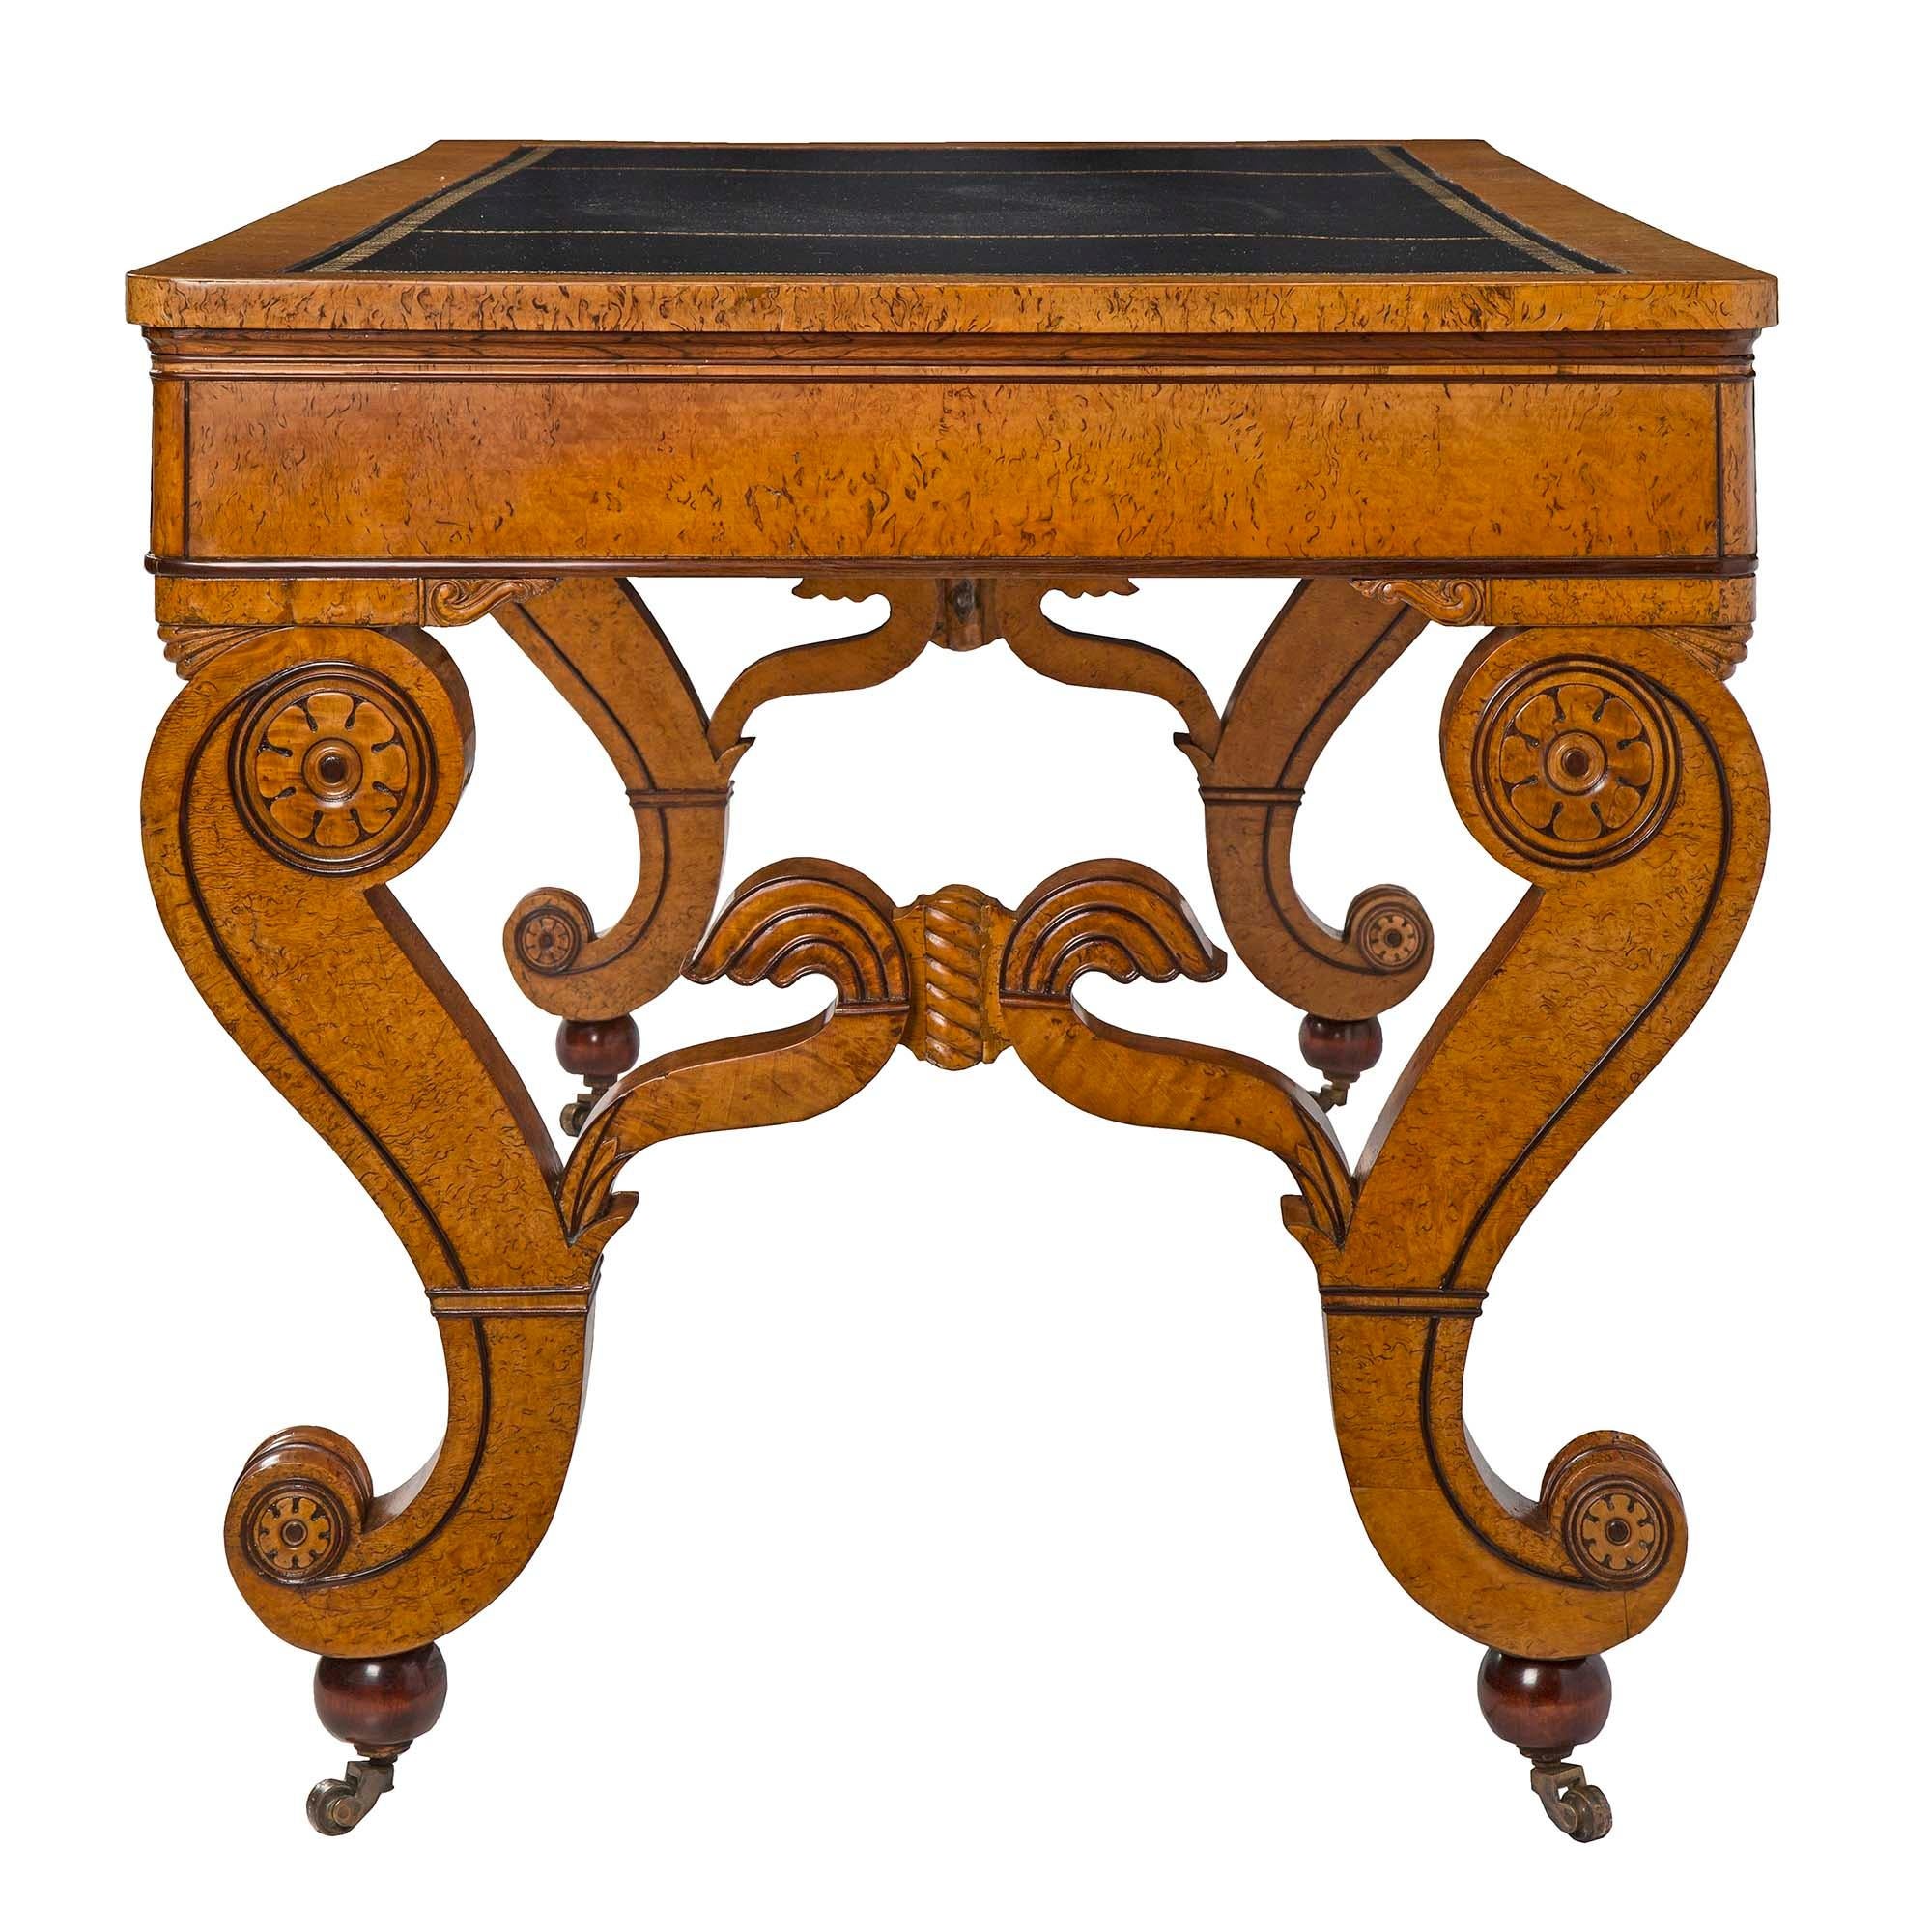 Continental 19th Century Burl Maple Biedermeier Desk or Center Table In Good Condition For Sale In West Palm Beach, FL